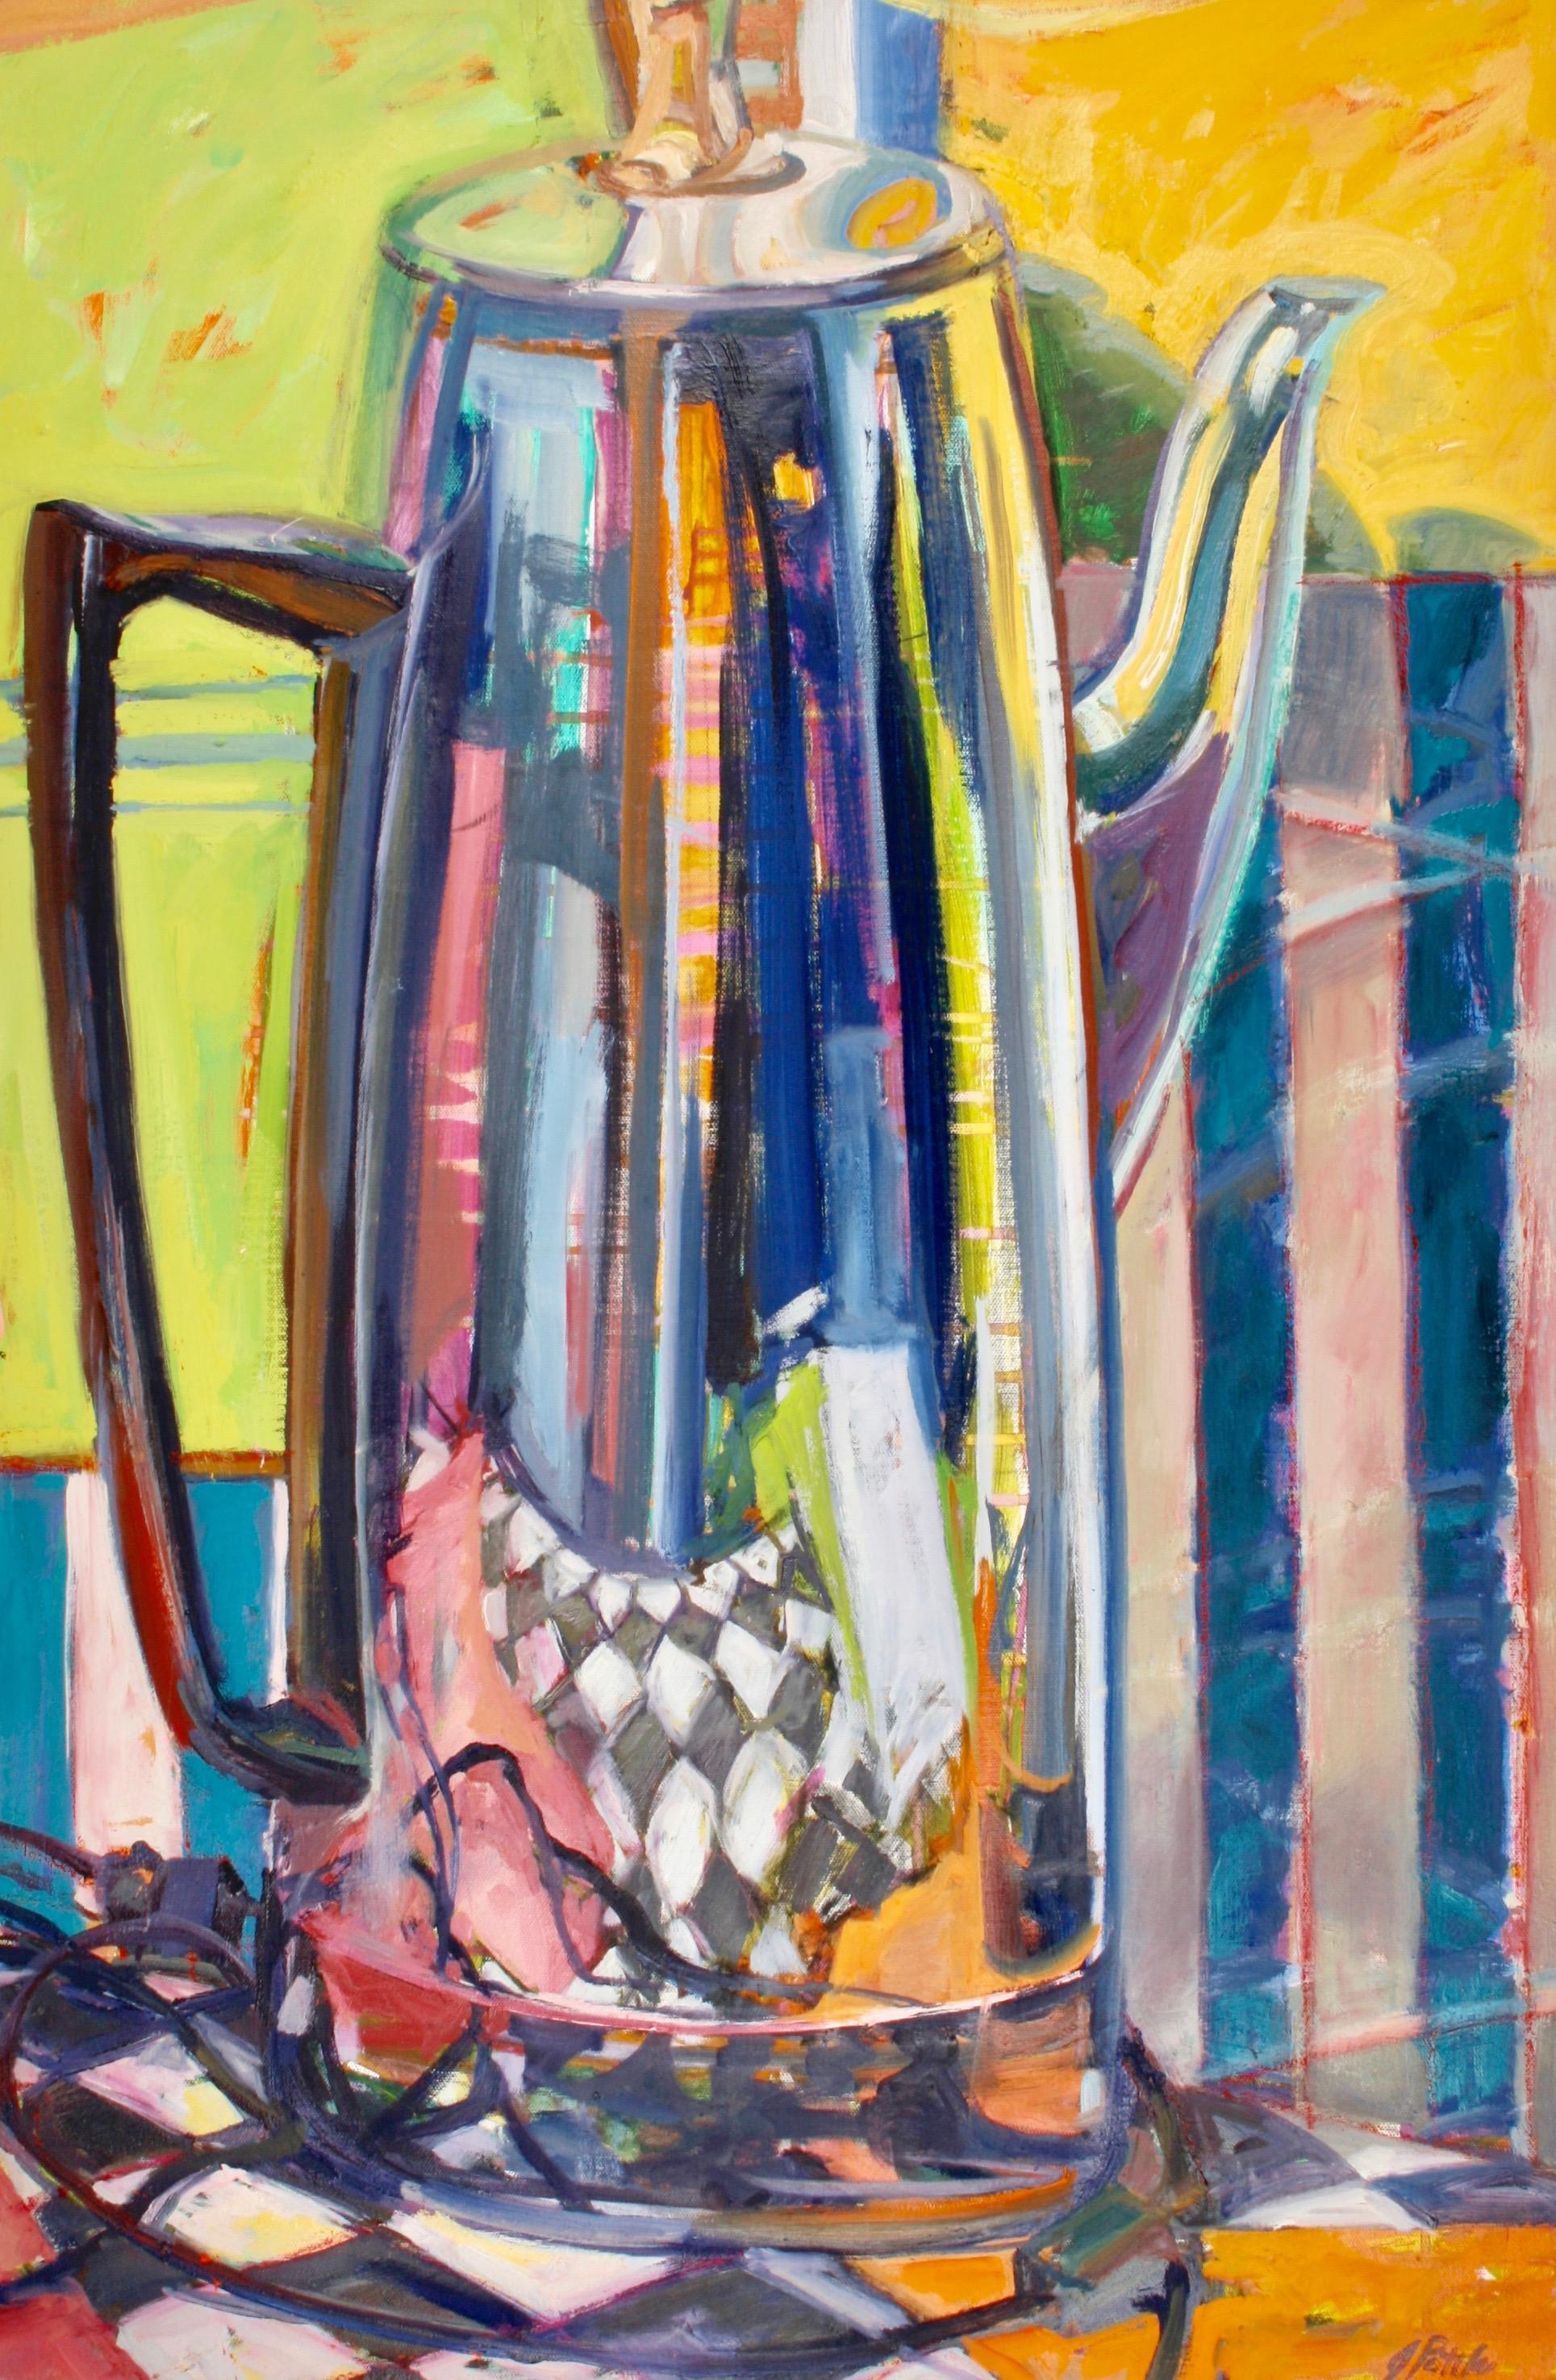 "Silver Pot I", contemporary, still life, retro, acrylic, oil painting - Painting by Jill Pottle